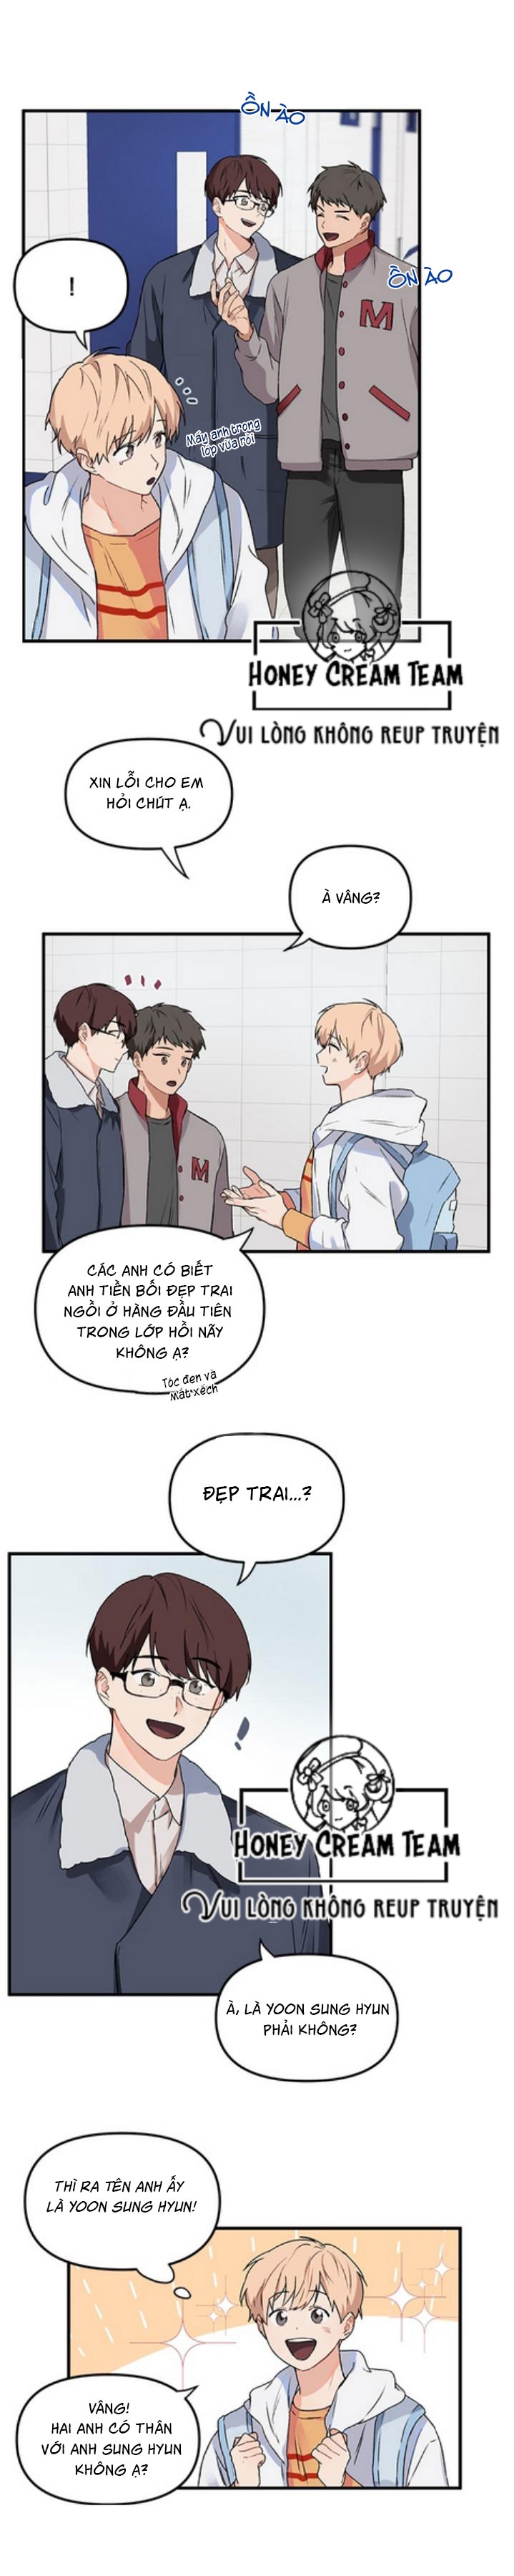 blood-and-love-chap-2-8